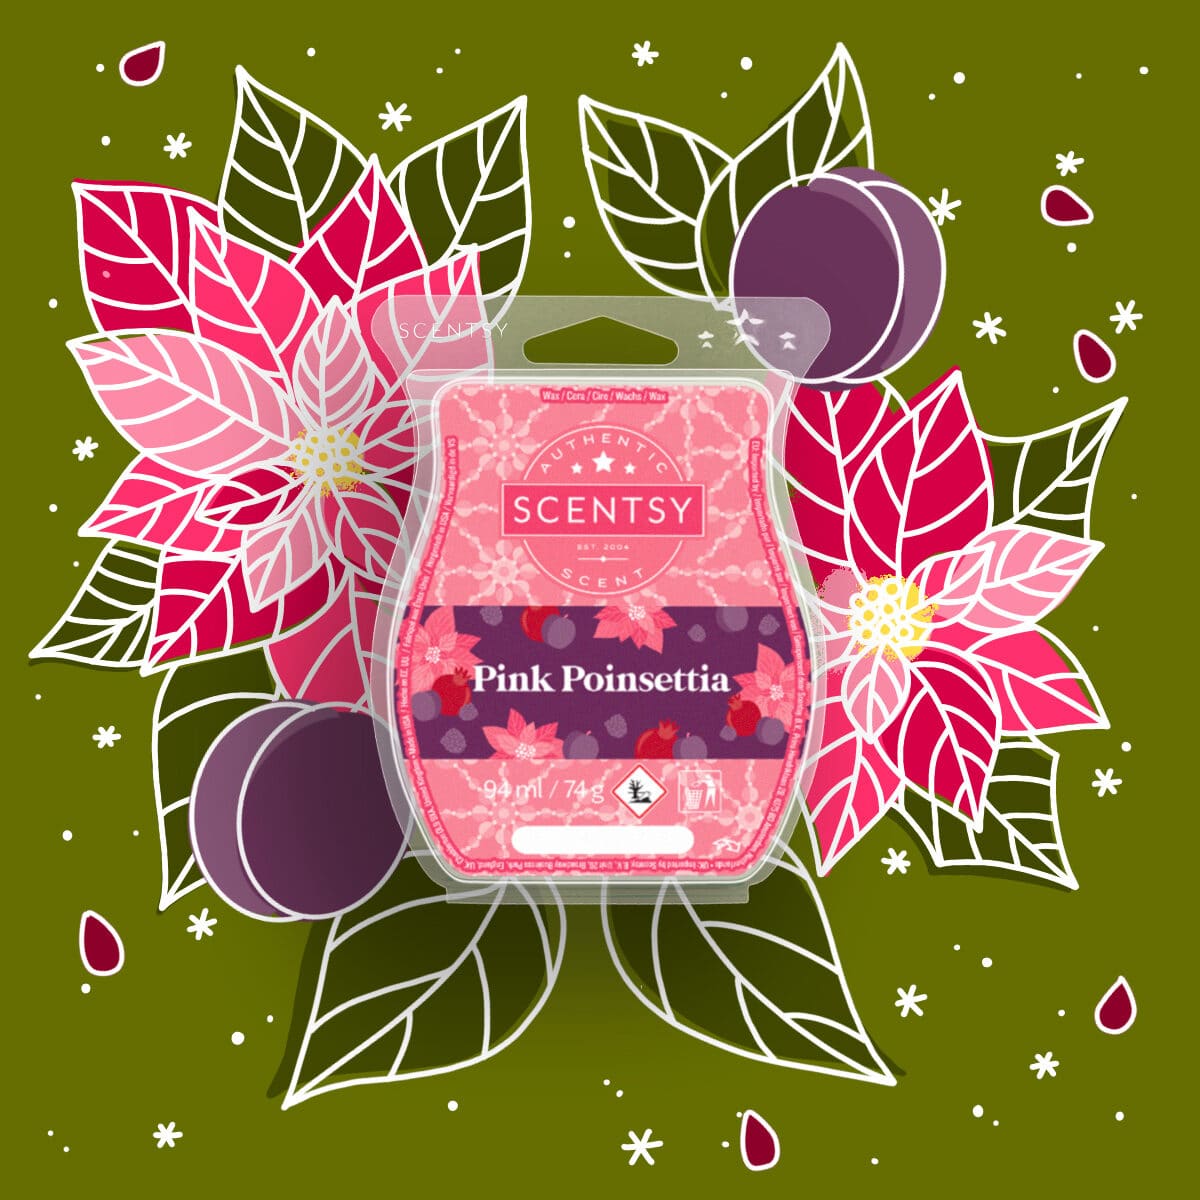 Pink Poinsettia Home for the Holidays 2021 Scentsy Wax Collection